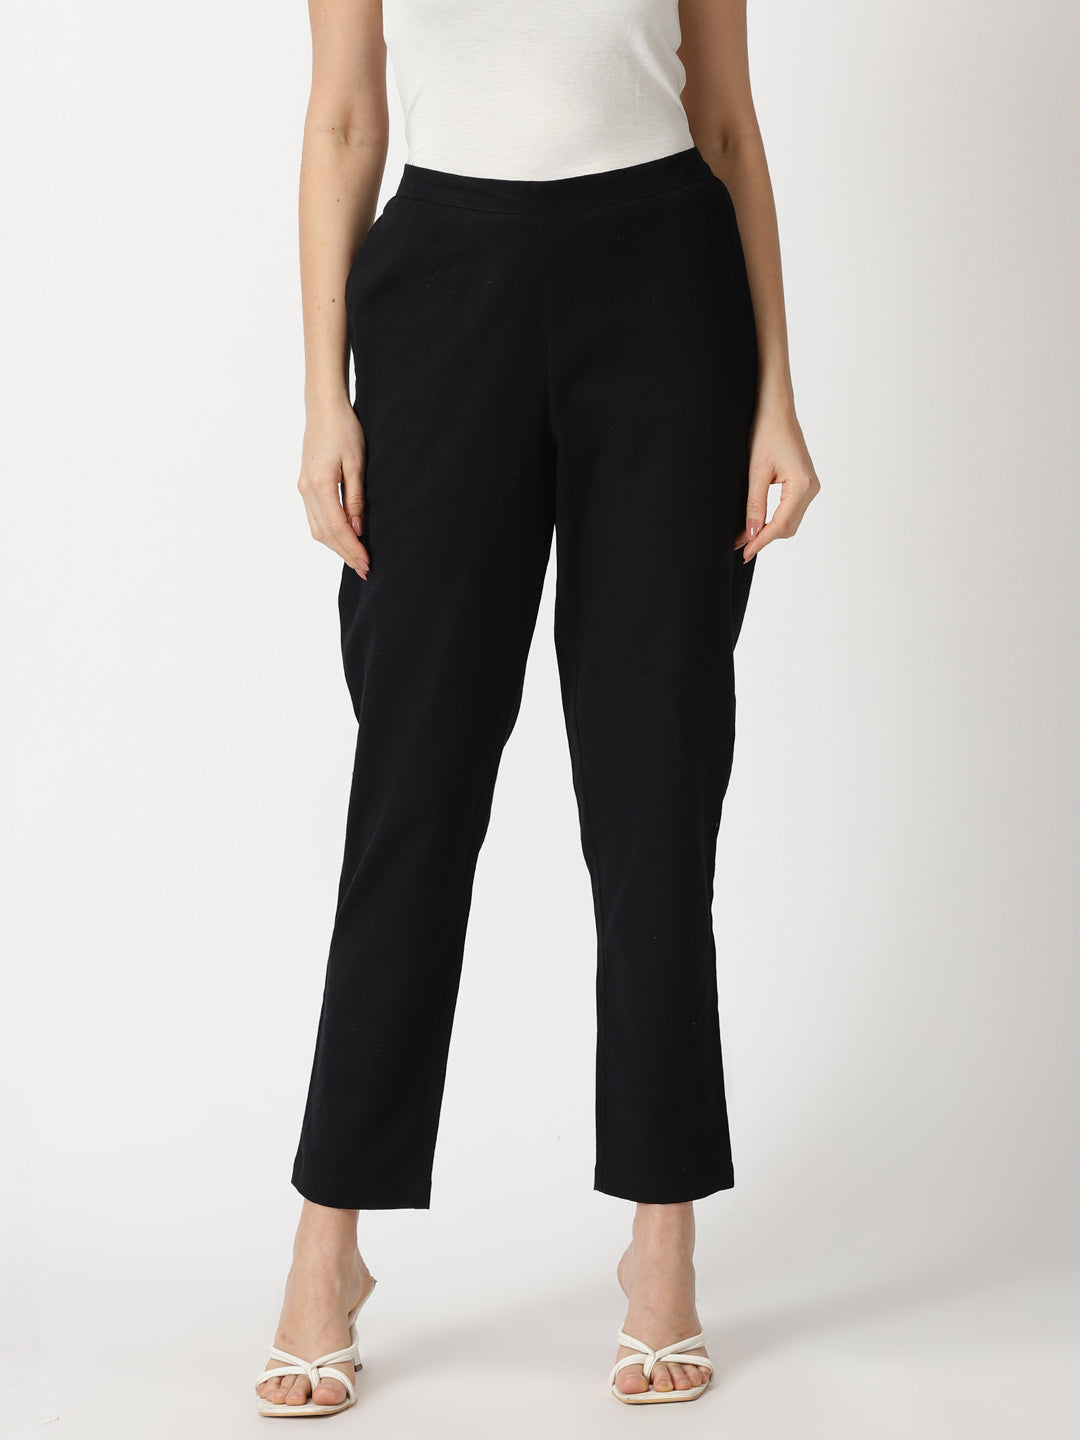 Black Cotton Flax Straight Fit Slip-on Trouser